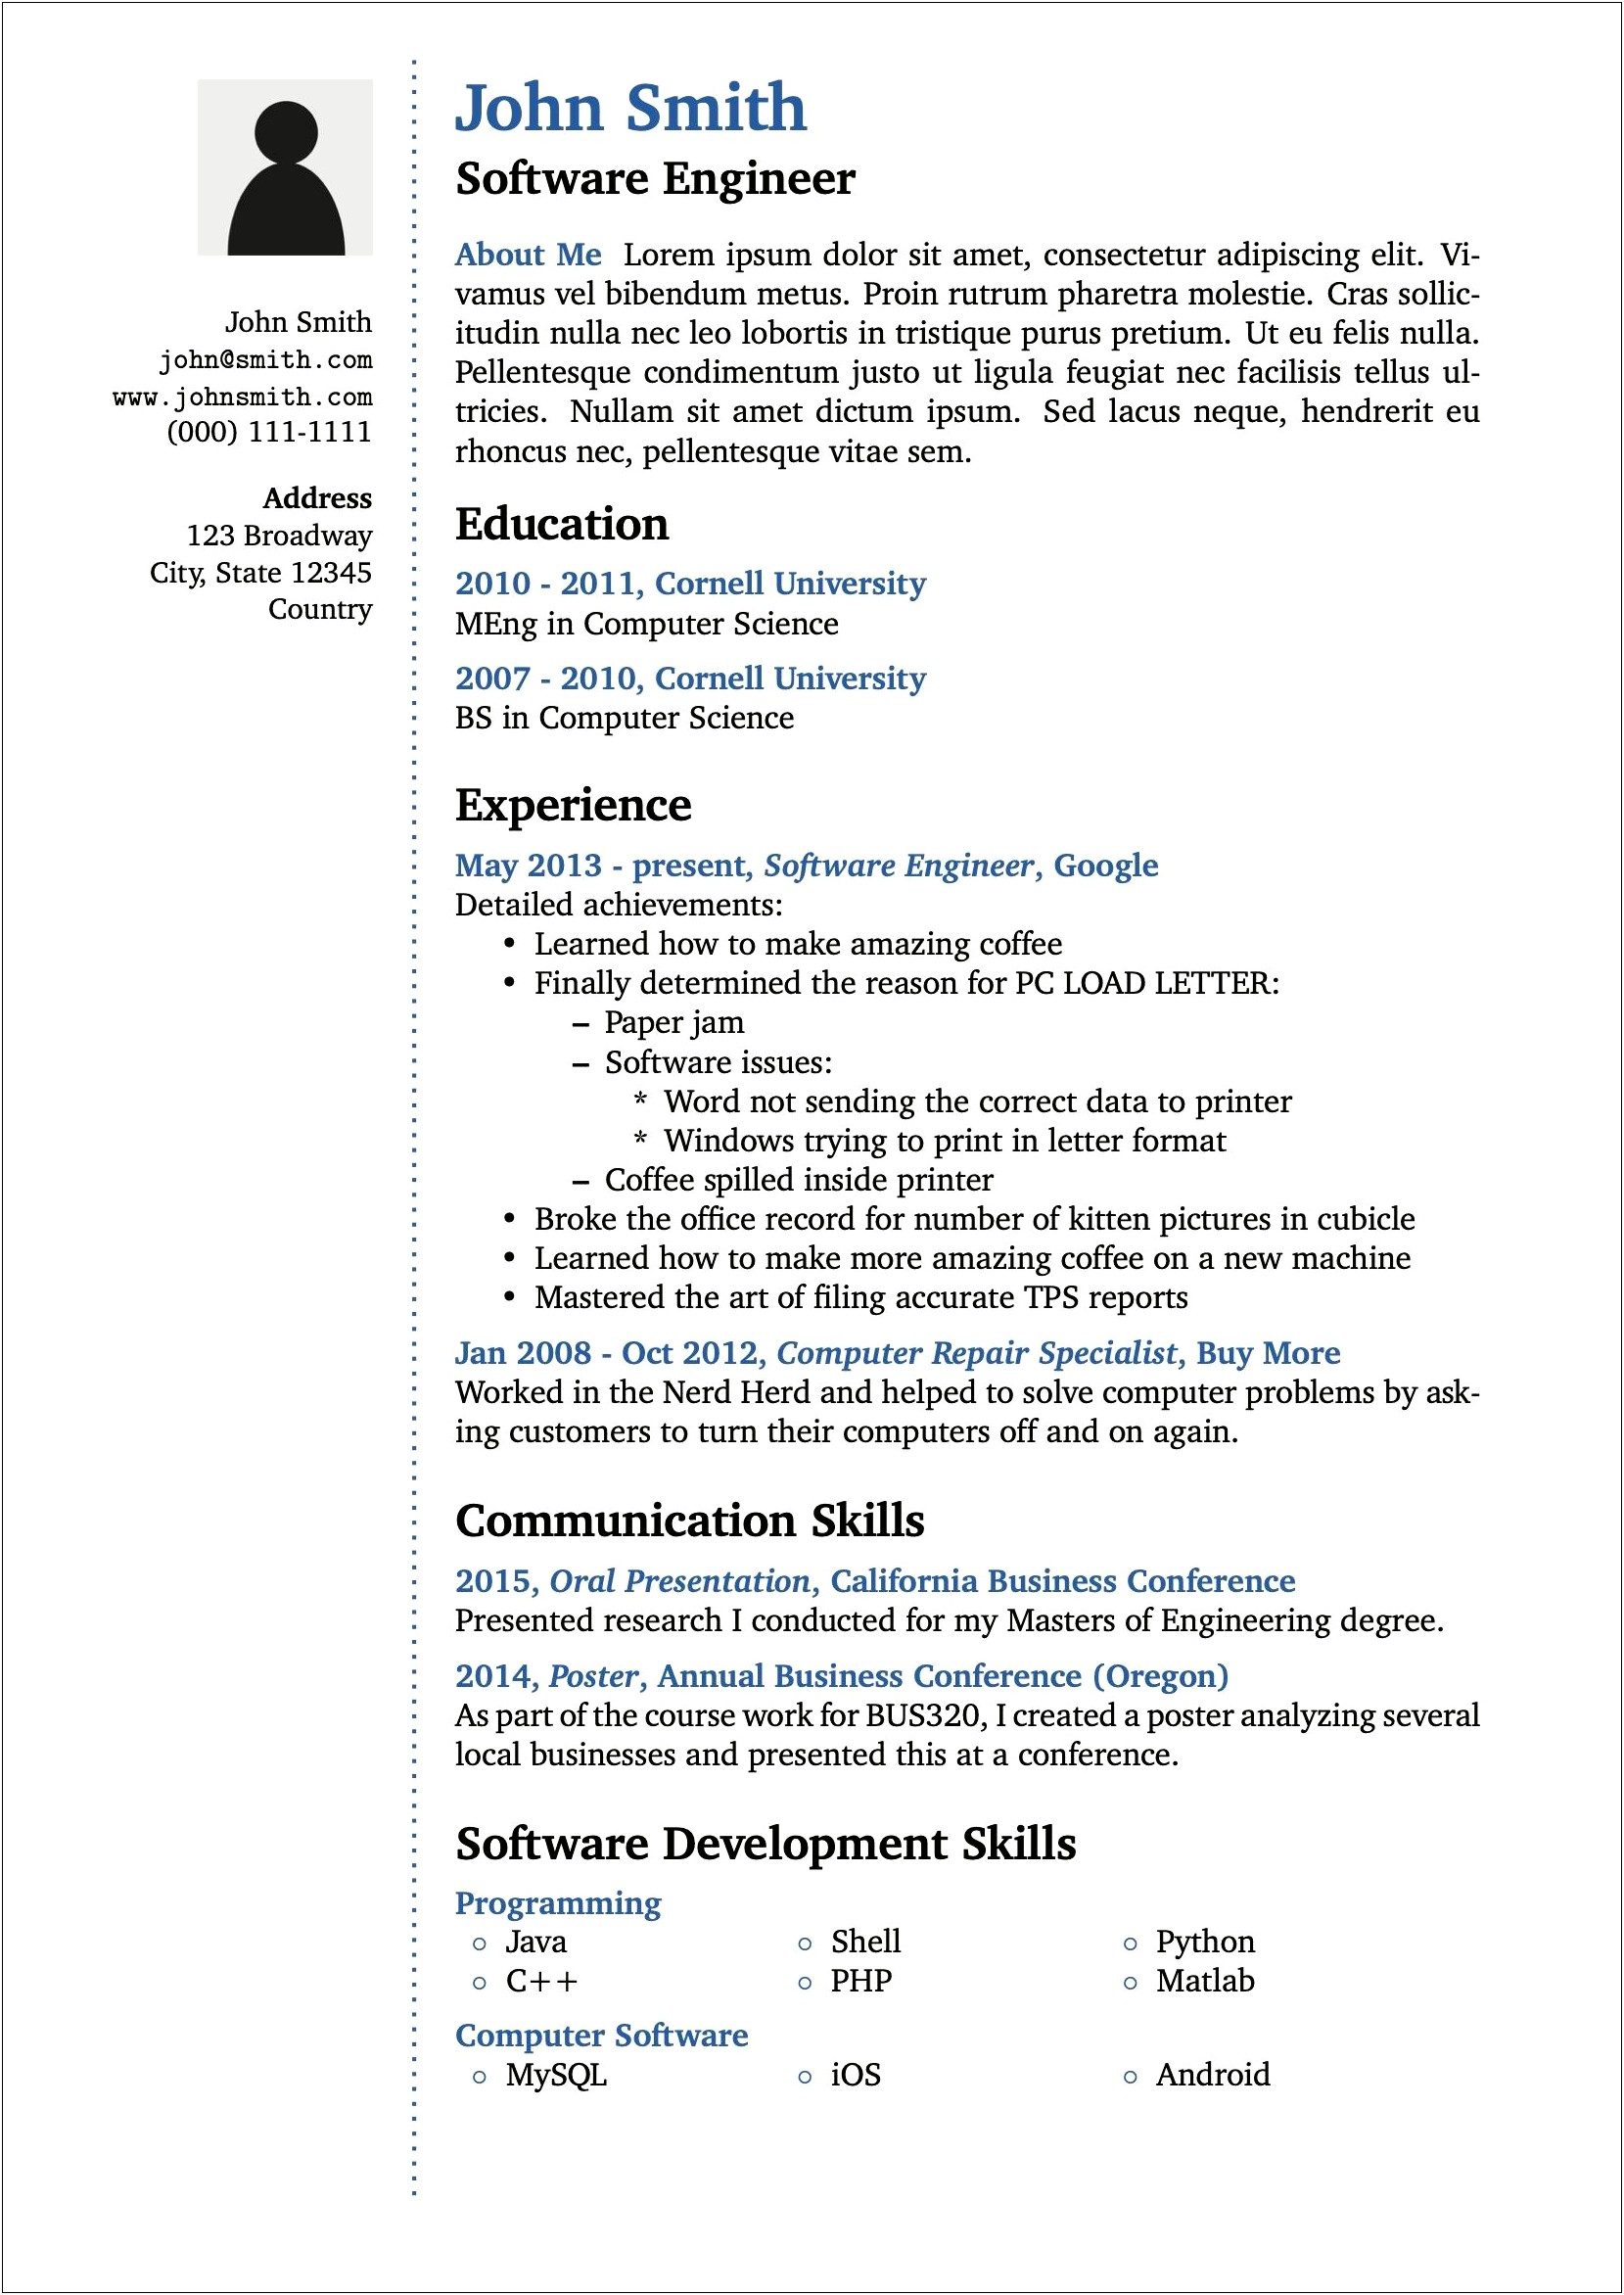 Resume Objectives For Computer Science Student